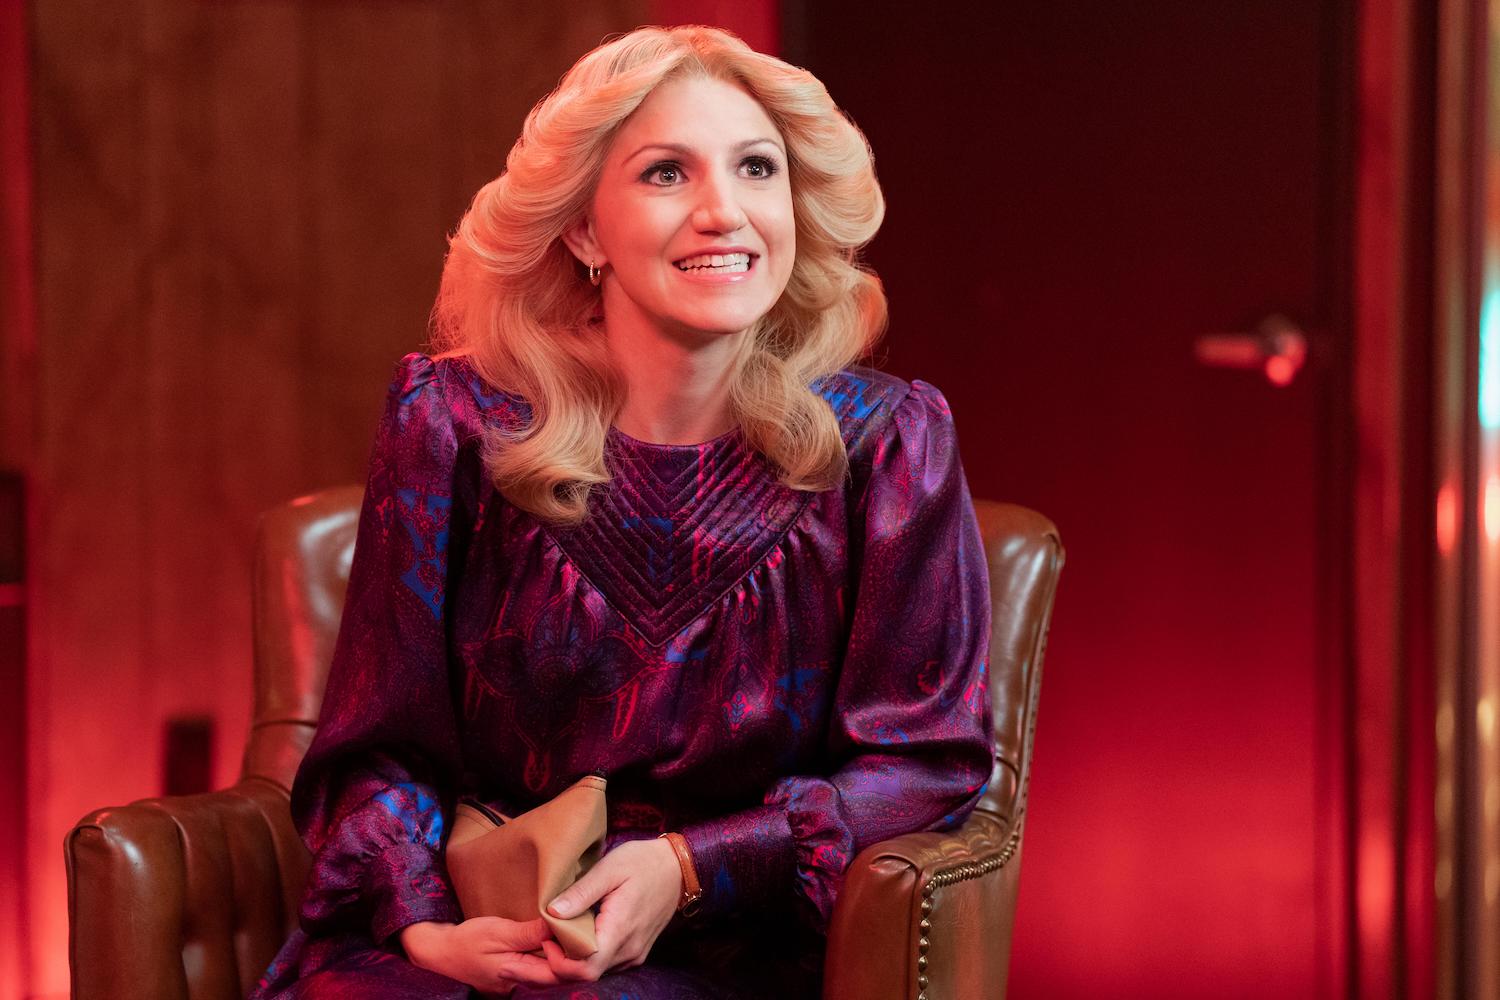 Annaleigh Ashford, seen here wearing a purple dress, plays Somen Banerjee's wife, Irene, in 'Welcome to Chippendales.'